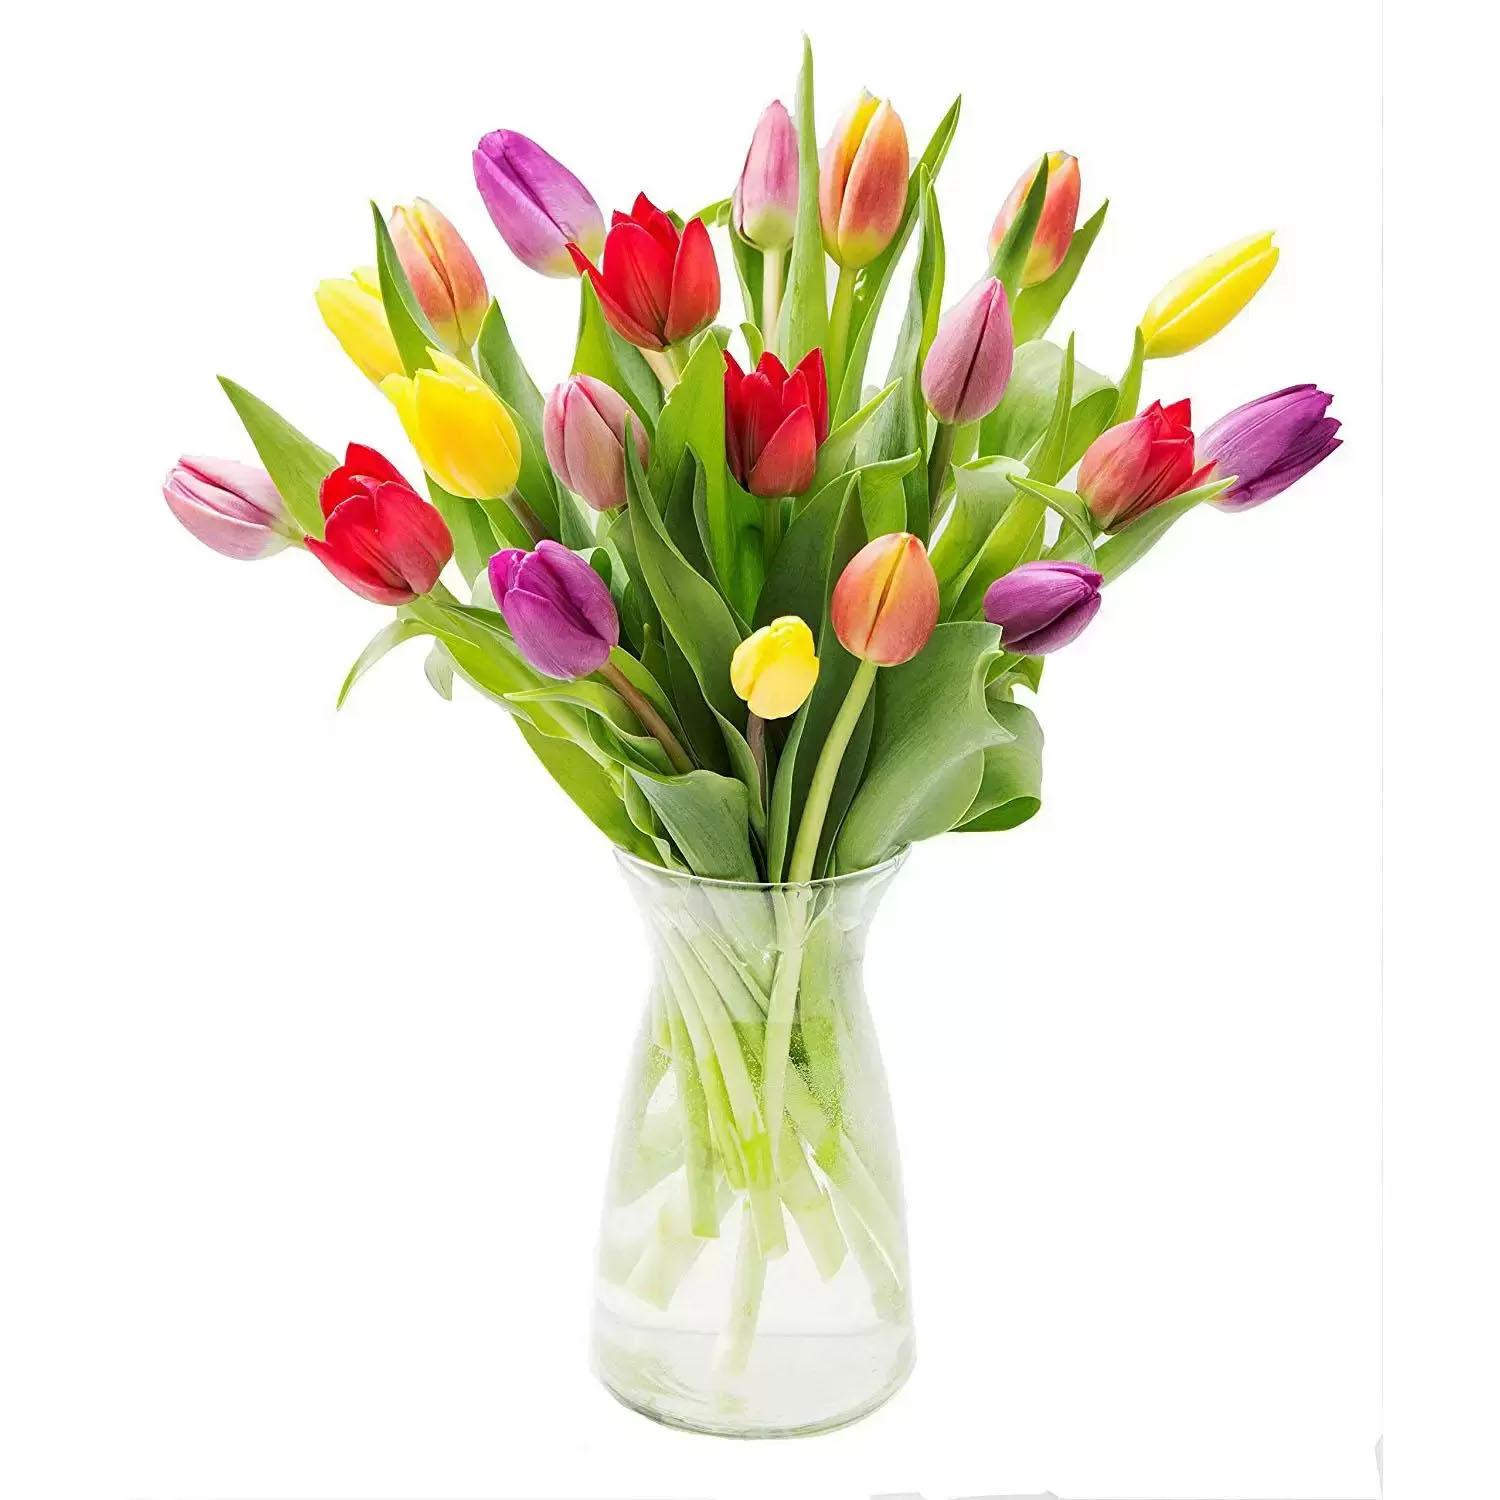 20-Stem Bunch of Tulips at Whole Foods Deals